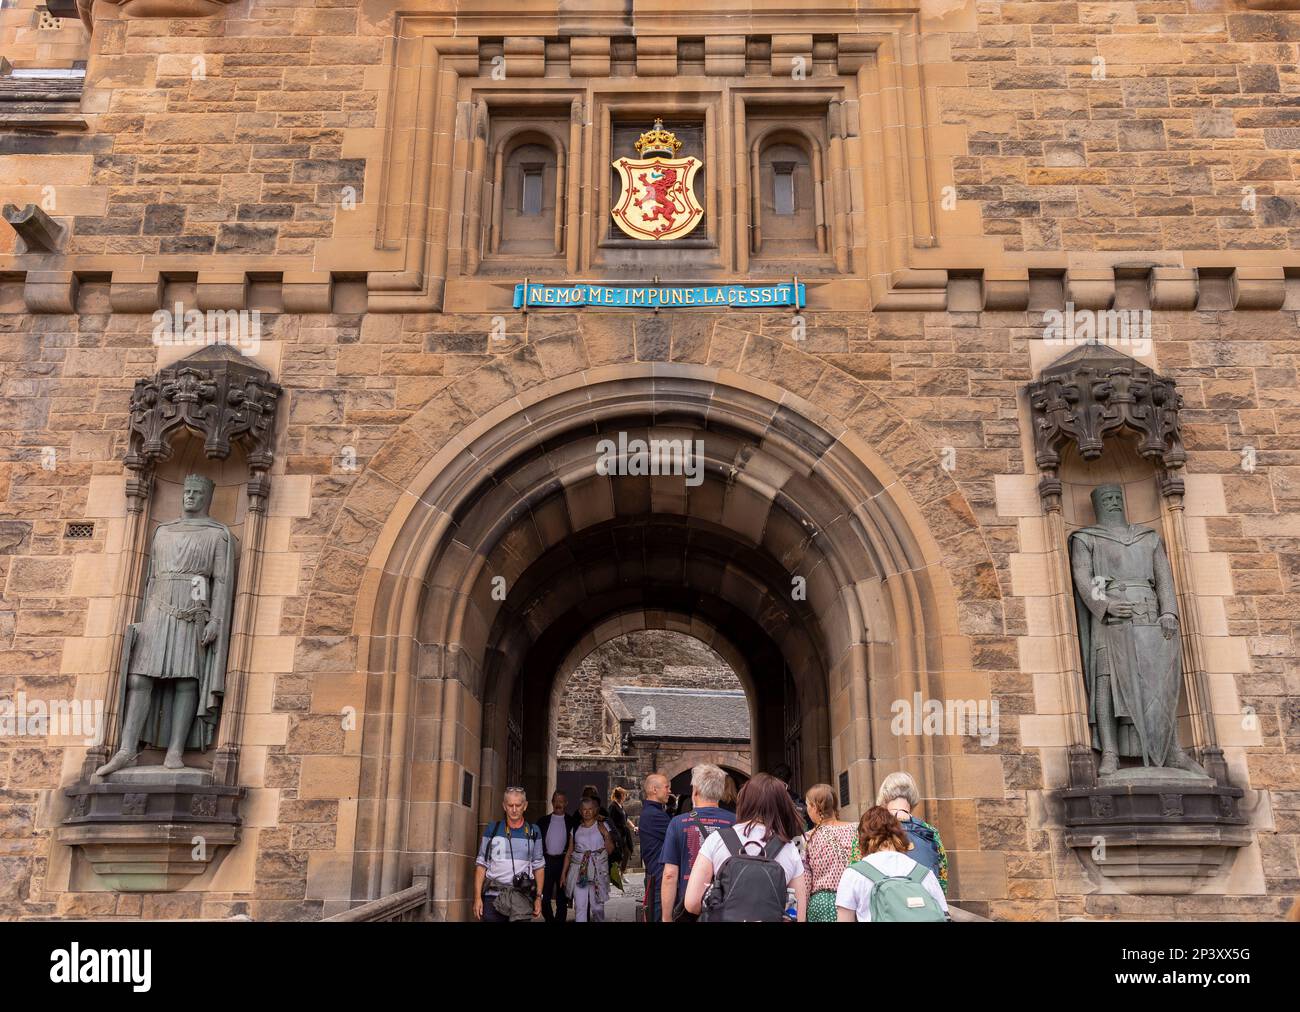 EDINBURGH, SCOTLAND, EUROPE - Entrance to Edinburgh Castle. Statues of Robert the Bruce, left, and William Wallace, right. Stock Photo